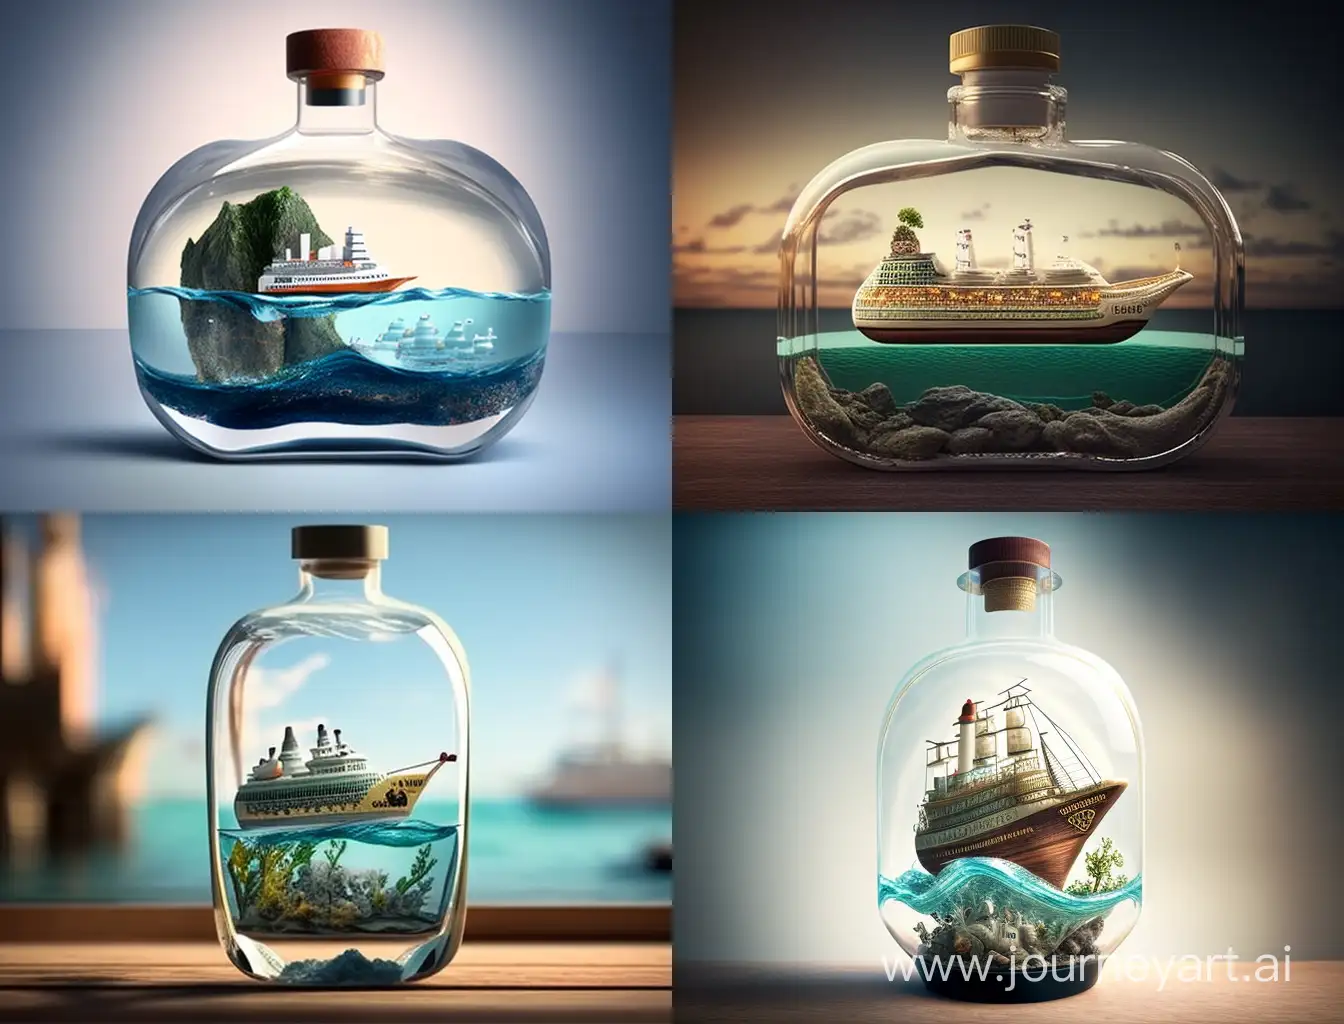 Contemporary-Cruise-Ship-Encased-in-a-Glass-Bottle-Art